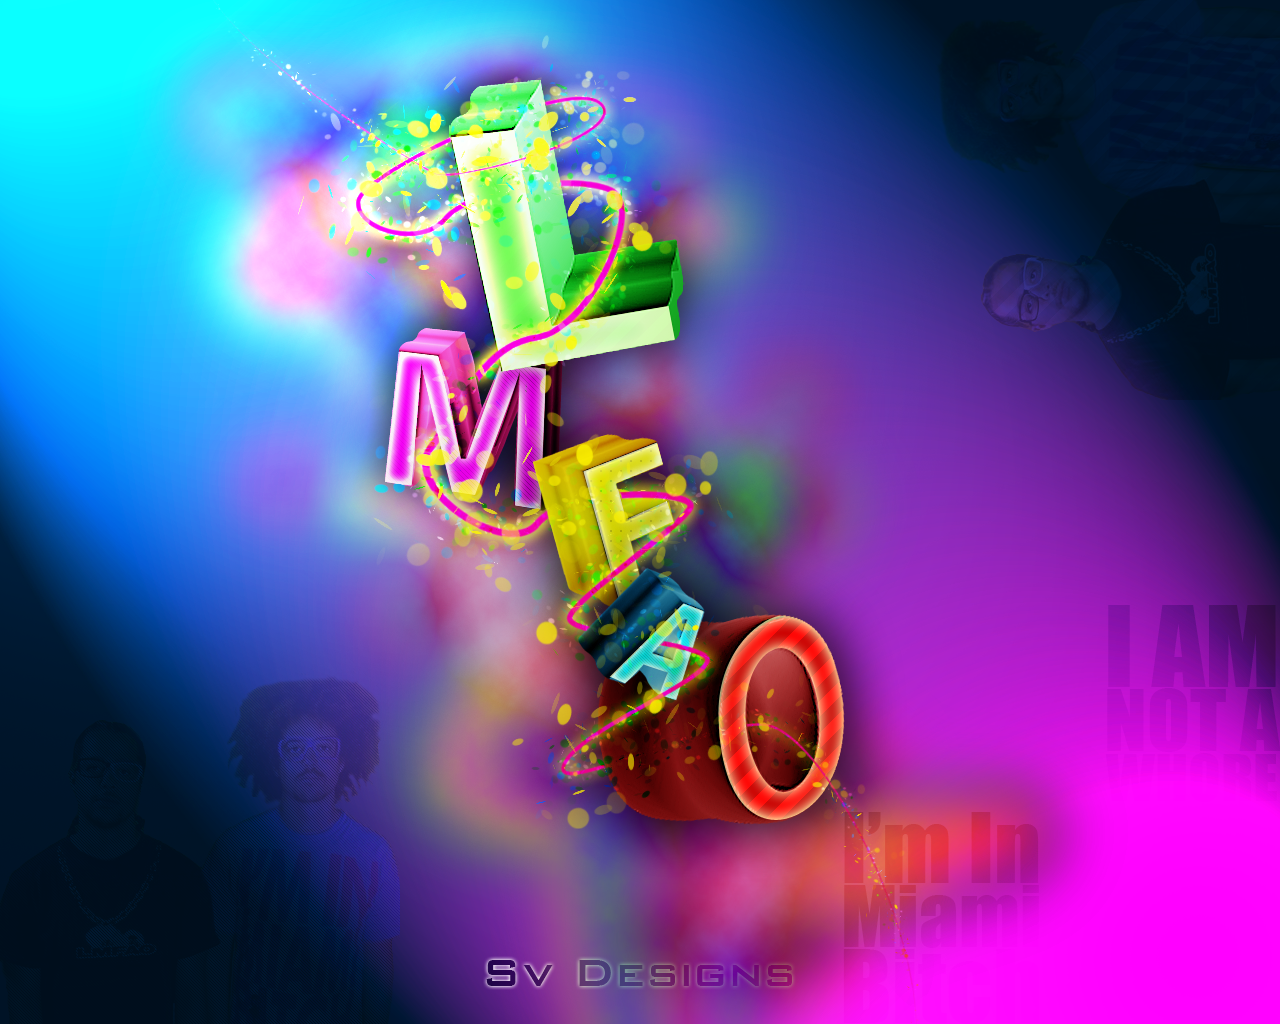 Lmfao Wallpaper 3d Typo By Shilpinator